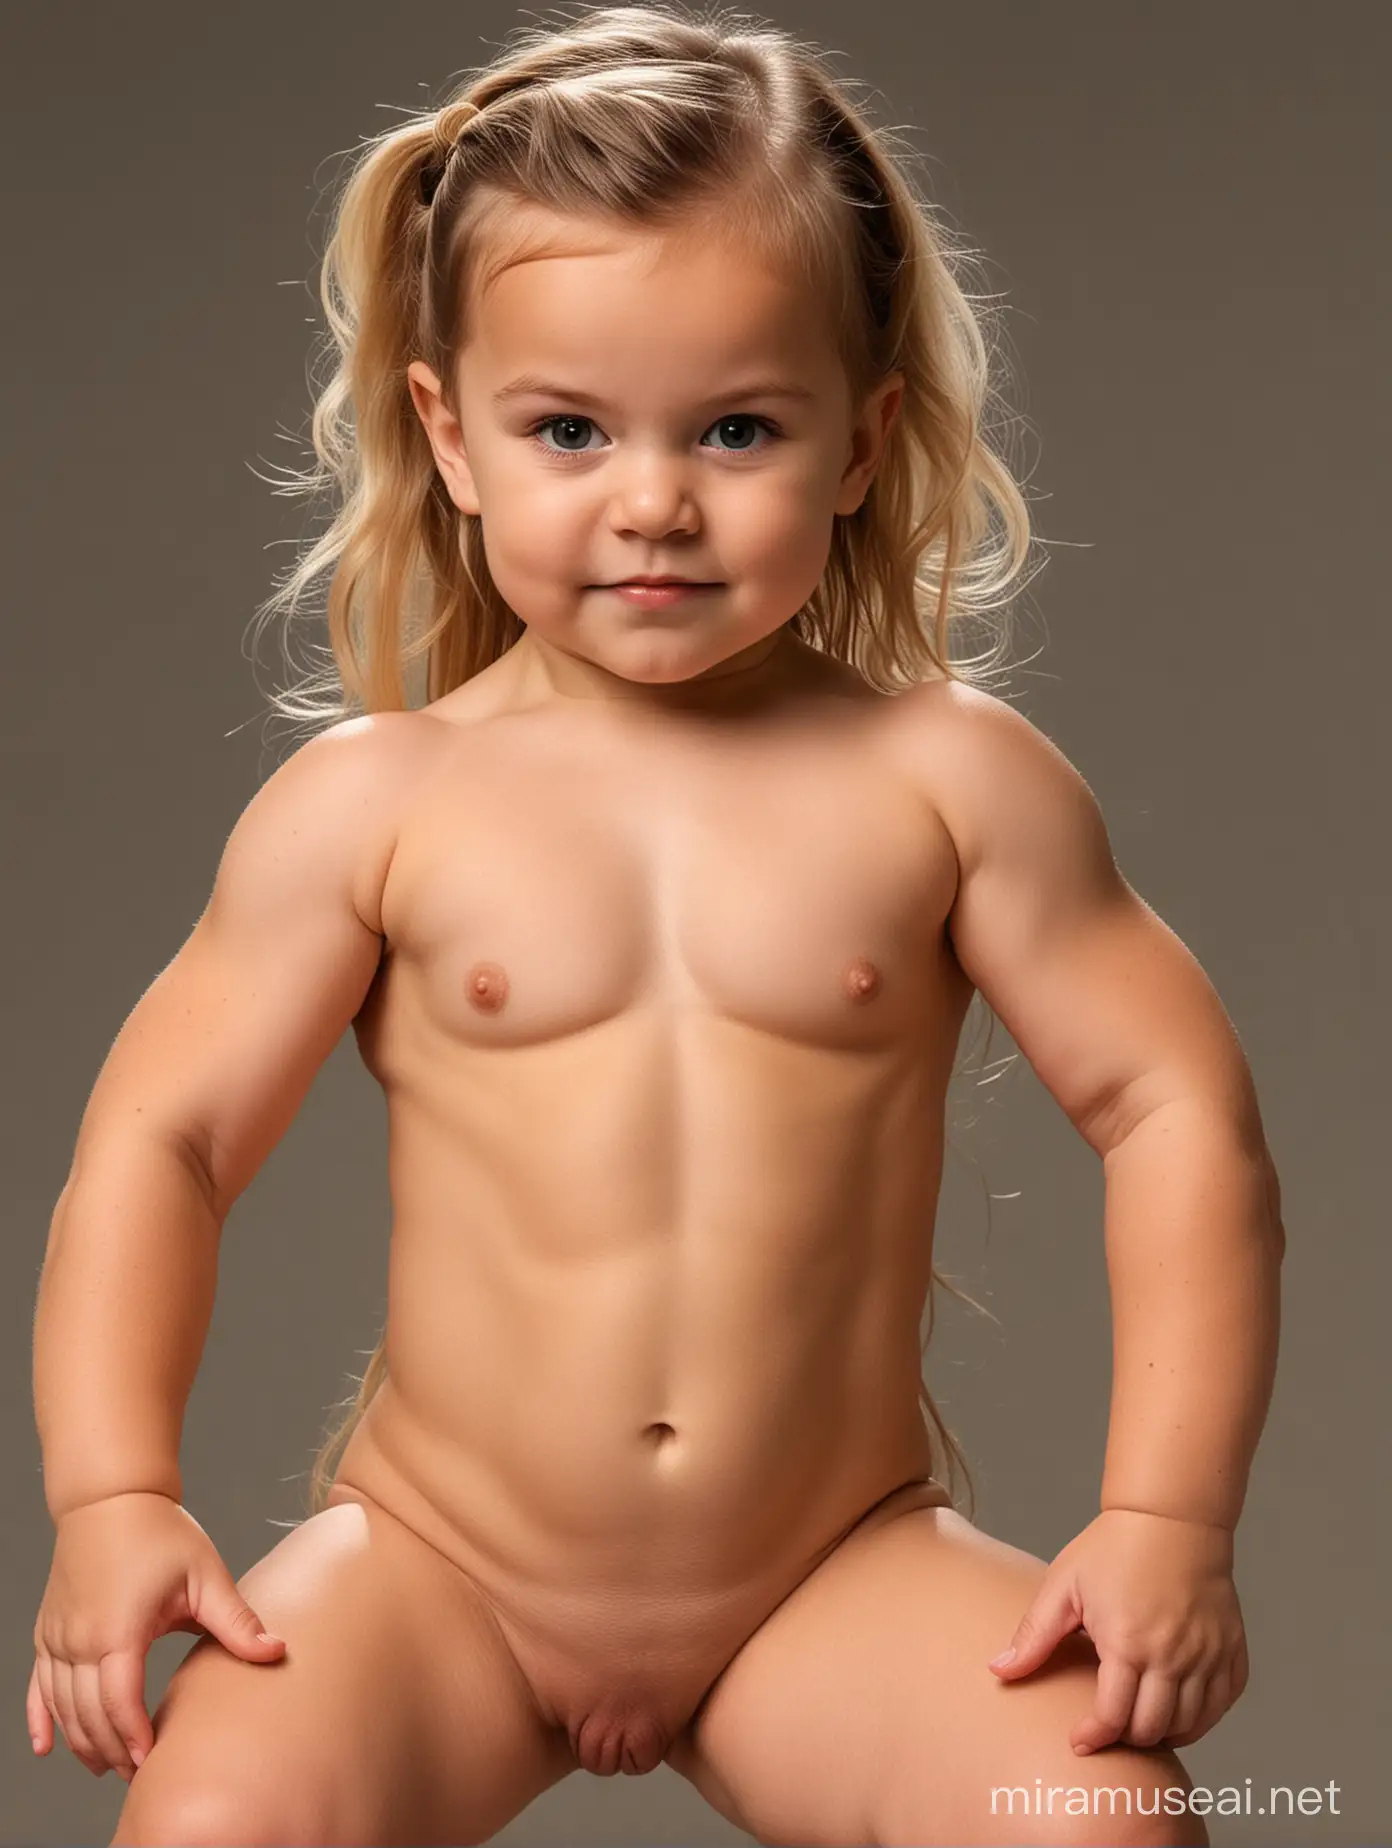 Playful Nude Baby with Muscular Guardian